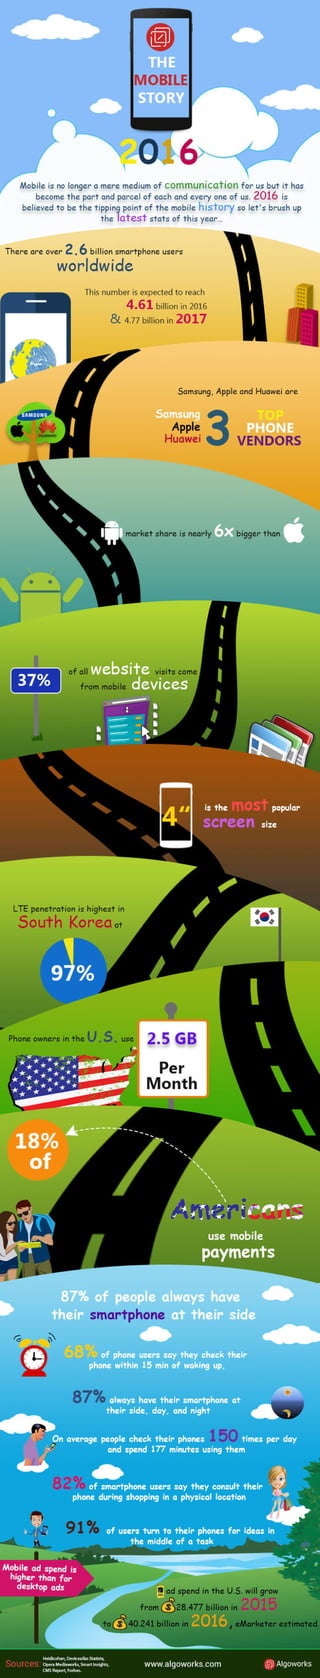 The Mobile Story 2016 [Infographic]